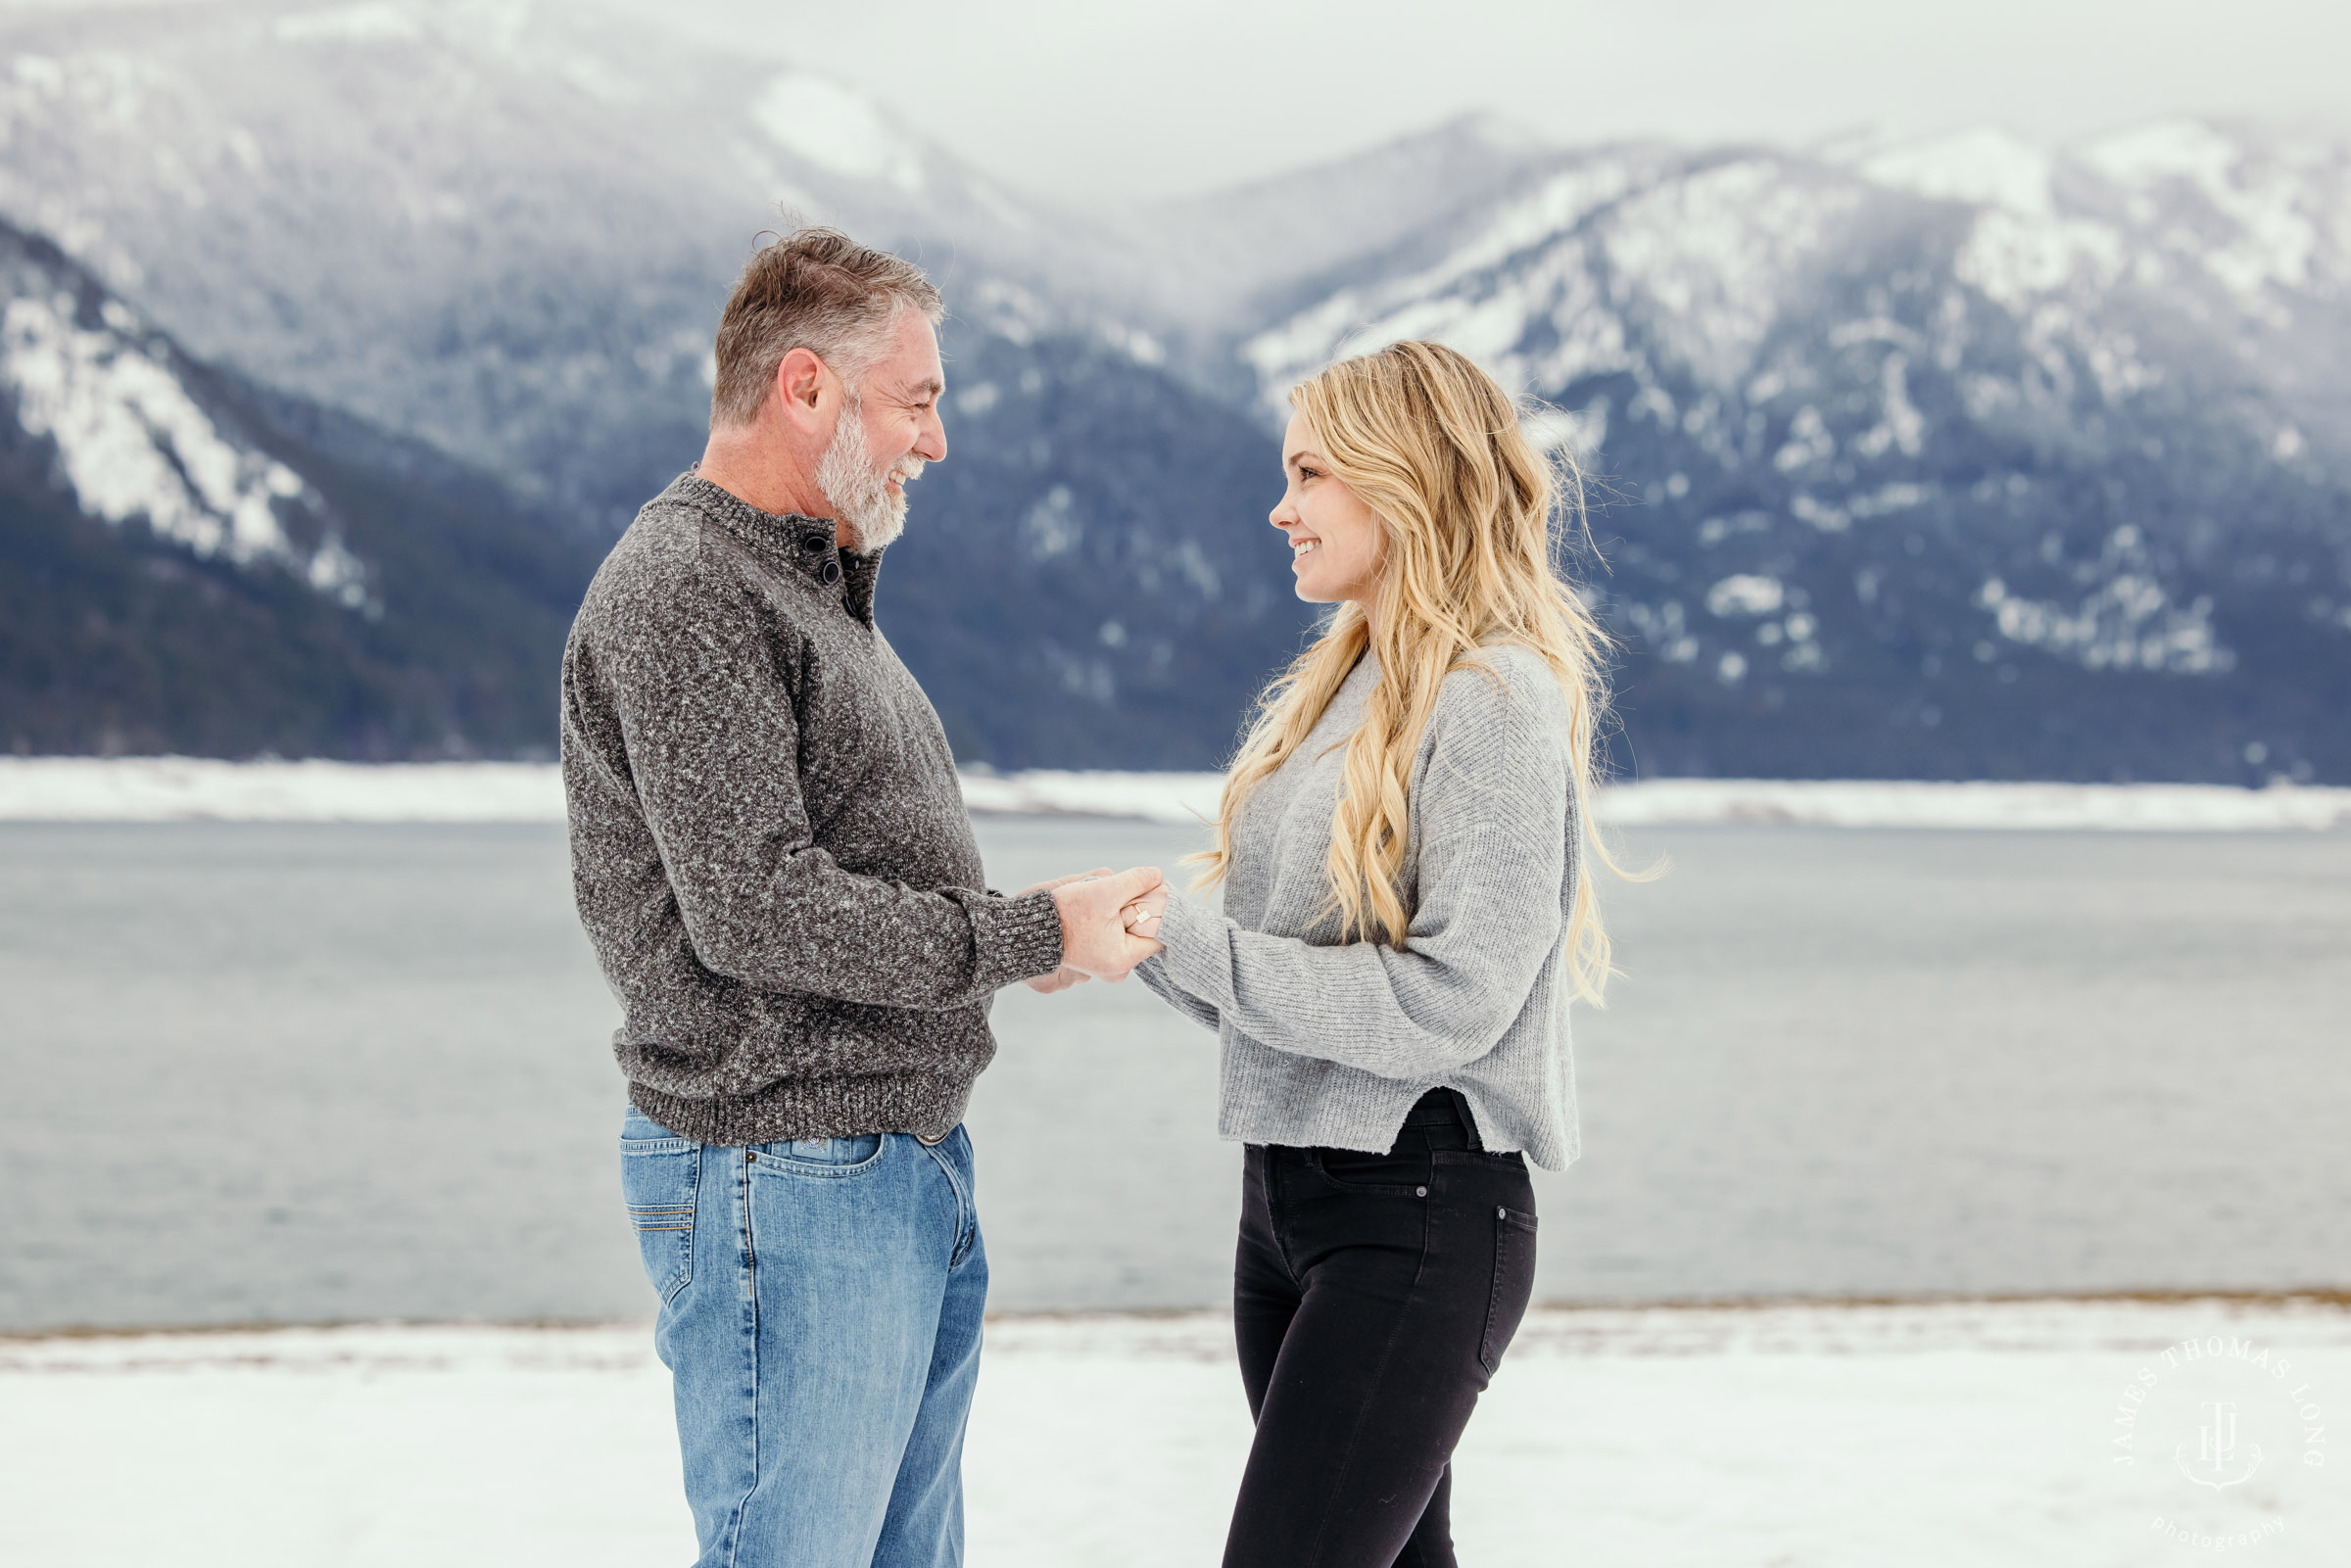 Cascade Mountain family photography session in the snow by Seattle family photographer James Thomas Long Photography